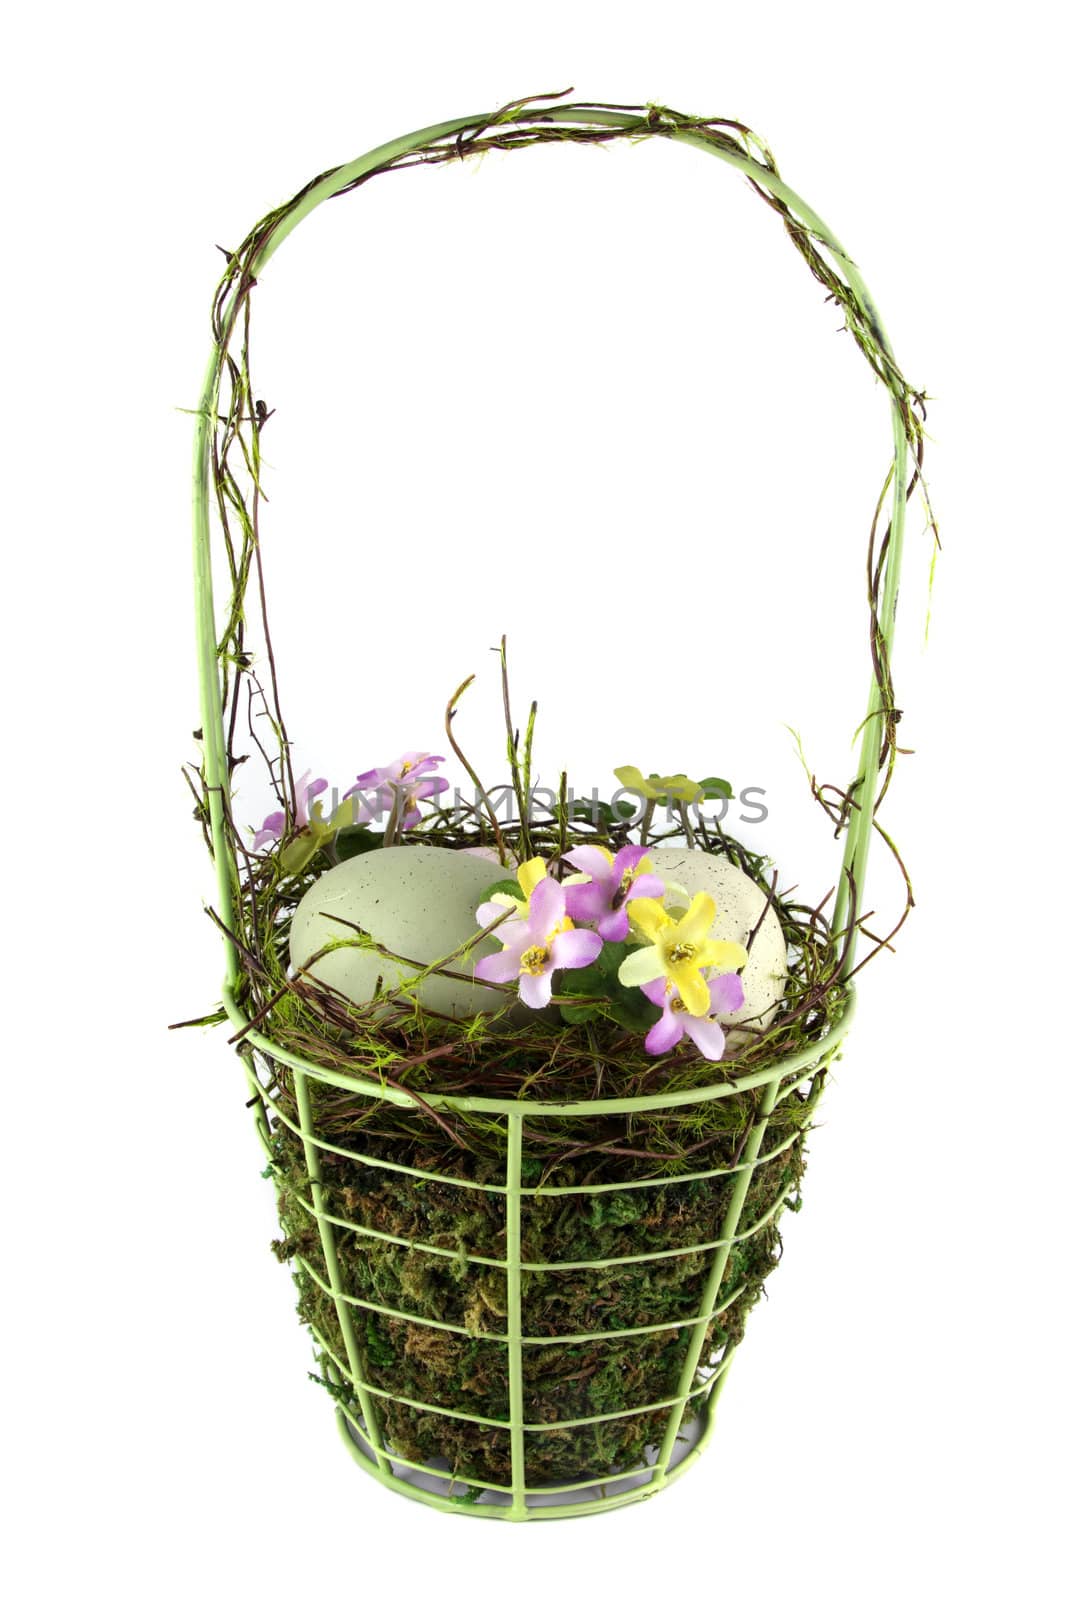 A decorative easter basket with easter eggs and flowers. Shot was taken on a solid white background.